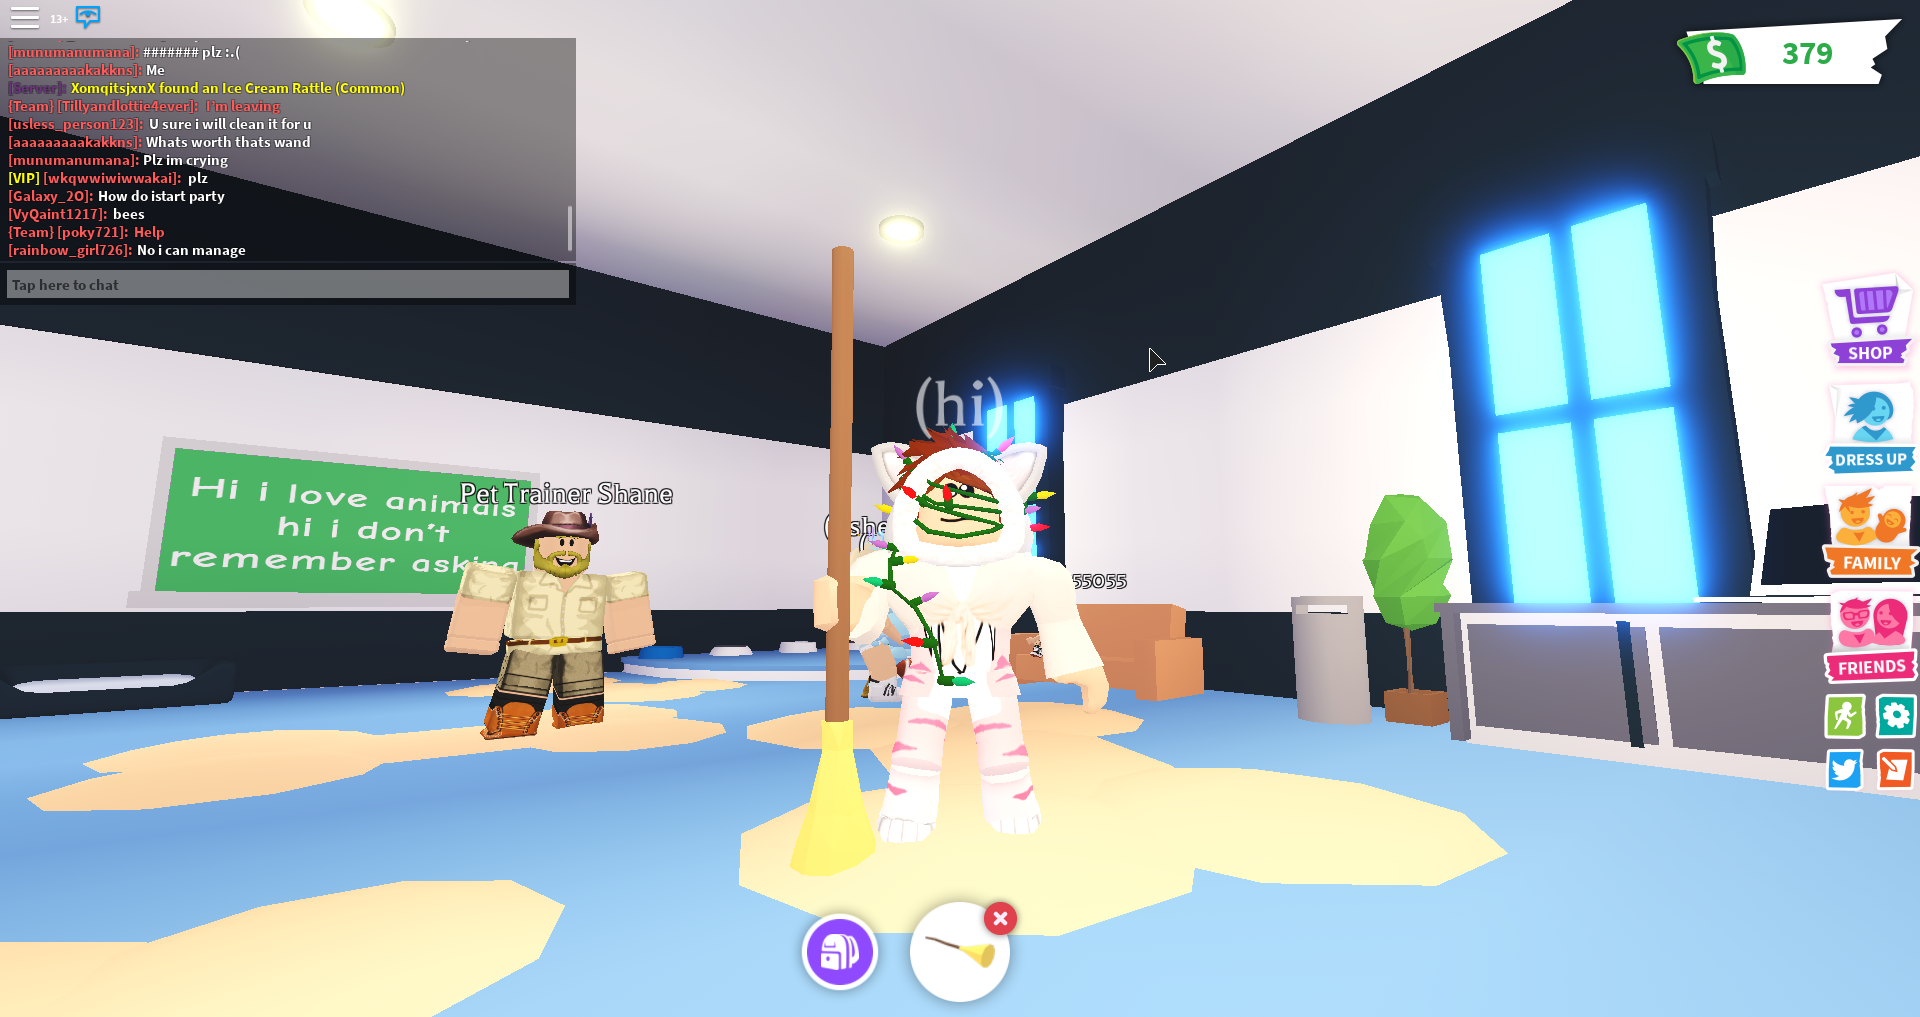 Trading A Broom For Fandom - roblox adopt me queen bee worth